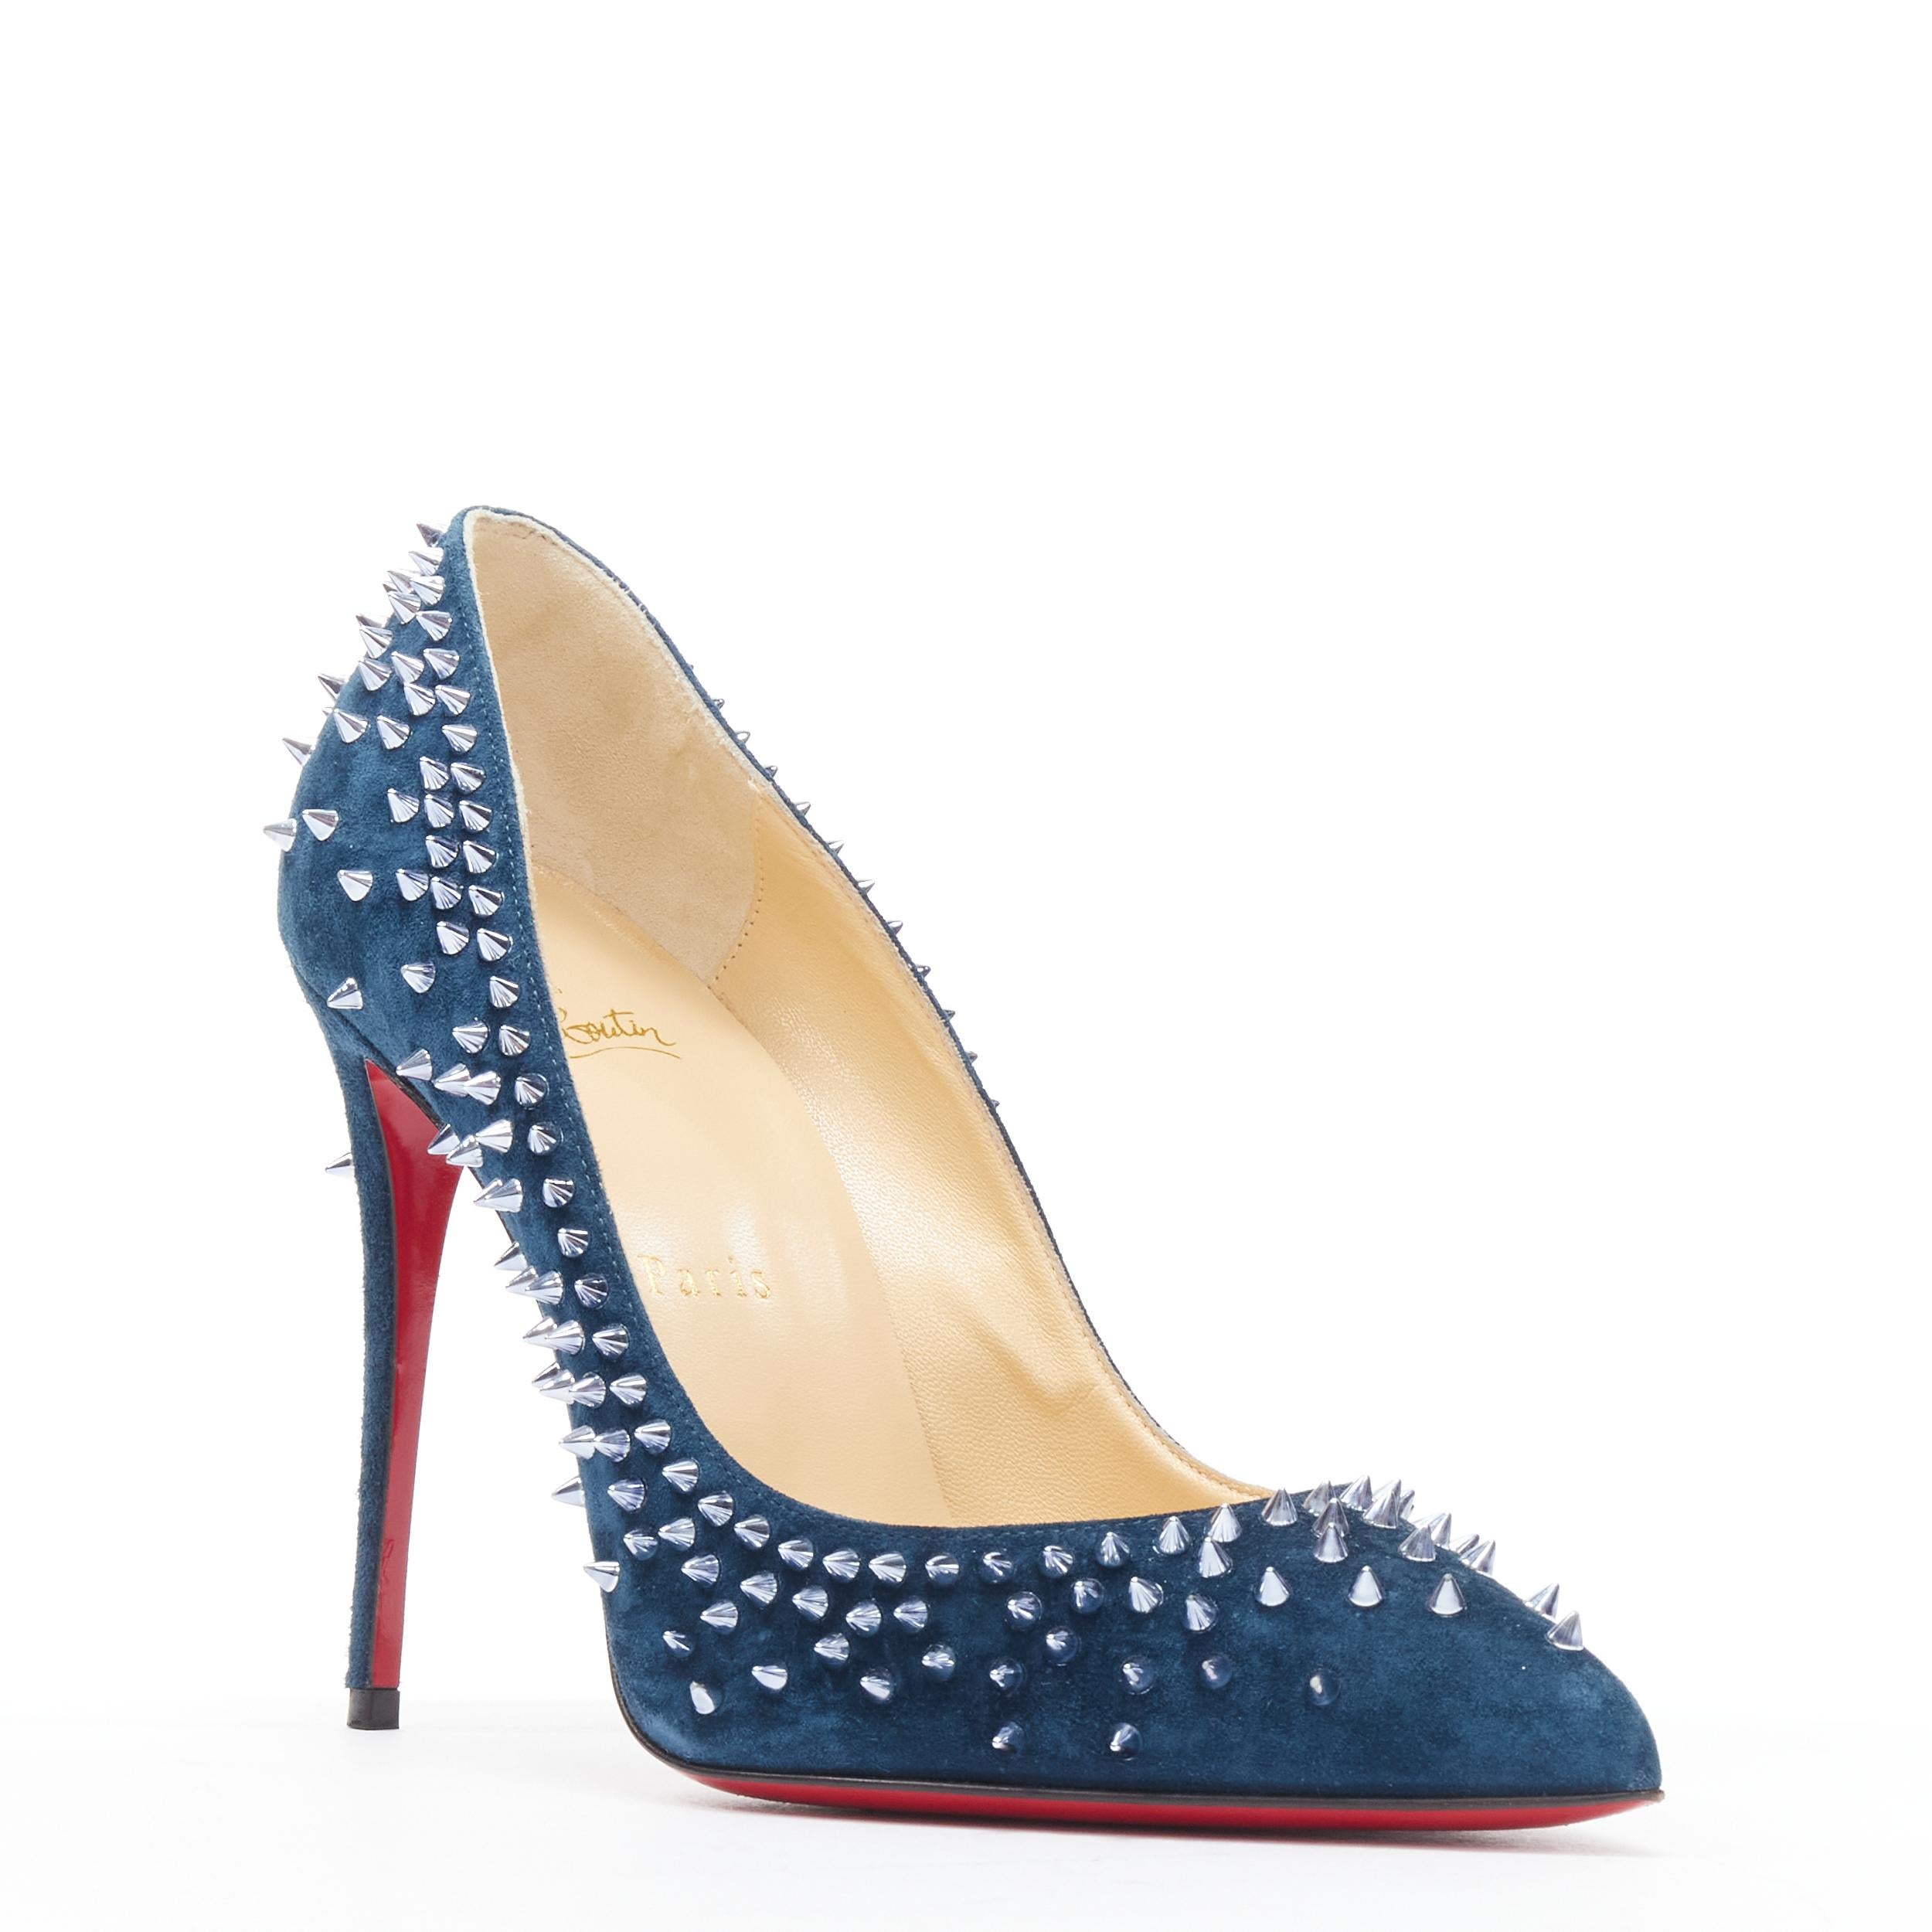 CHRISTIAN LOUBOUTIN Escaparic navy blue spike stud pigalle pump EU38.5 
Reference: TGAS/B01650 
Brand: Christian Louboutin 
Designer: Christian Louboutin 
Model: Escarpic studded 
Material: Suede 
Color: Blue 
Pattern: Solid 
Extra Detail: Escarpic.